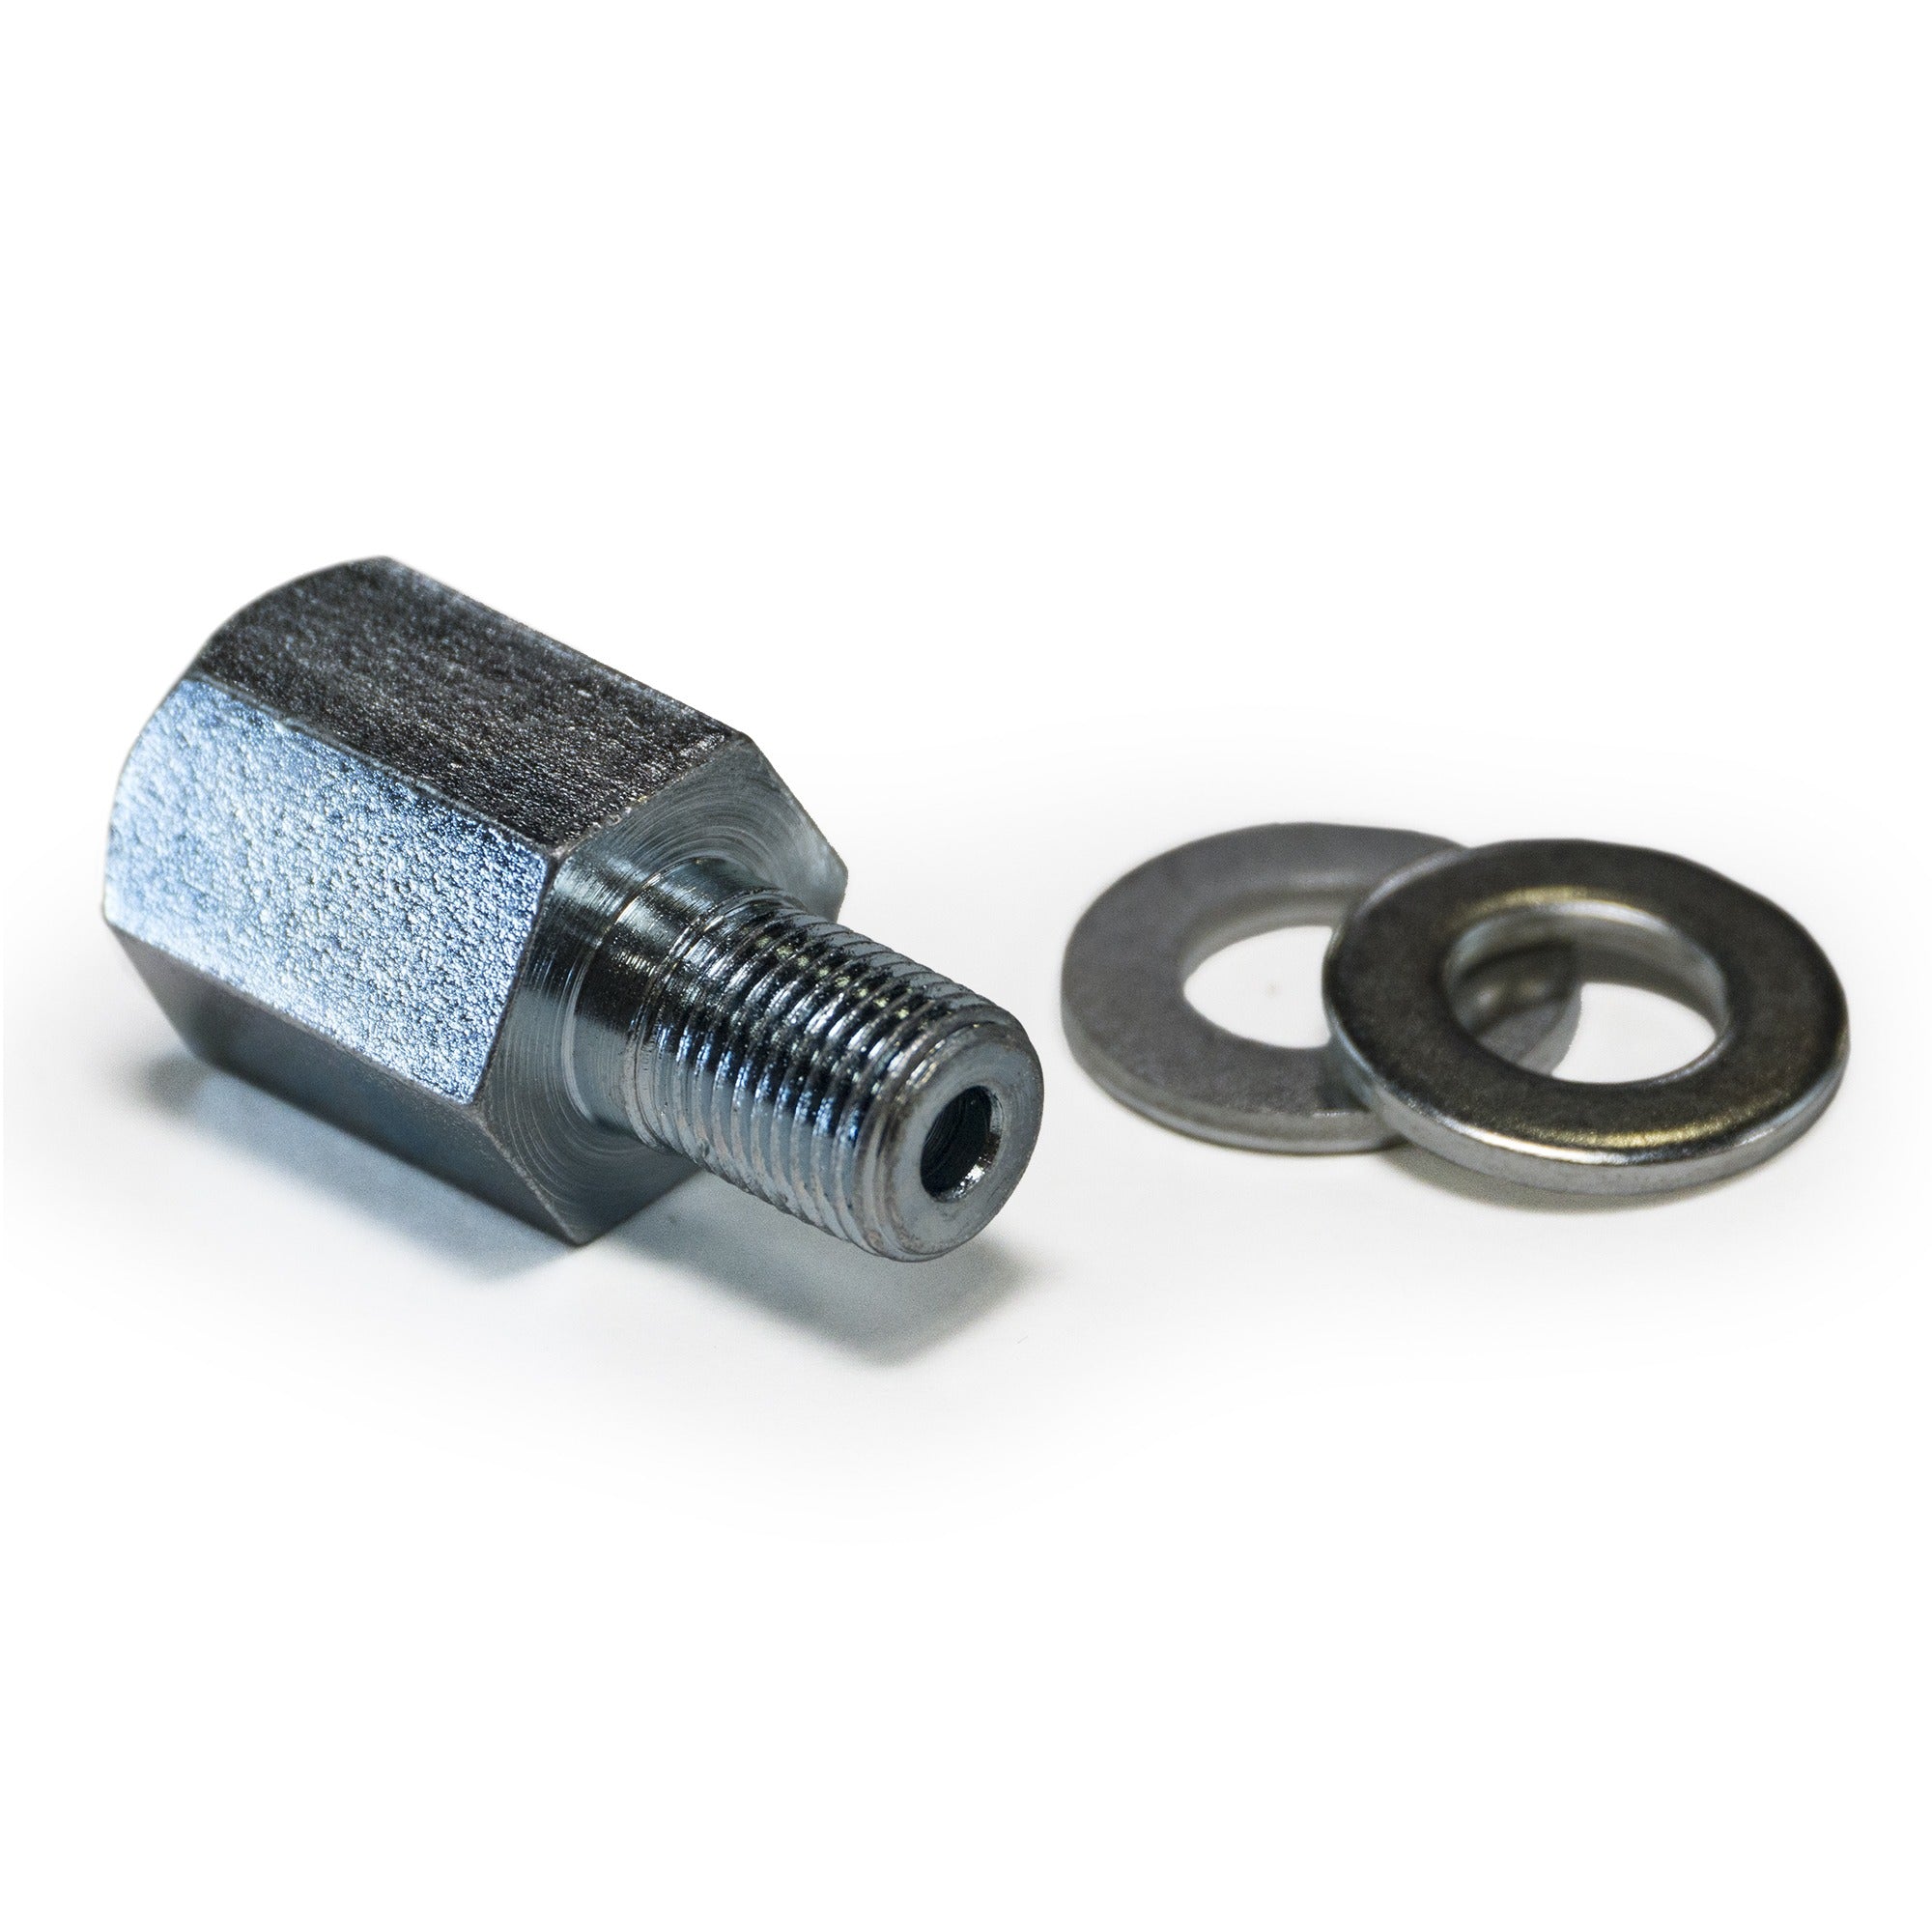 Hitch & Adapters for Burley Trailers